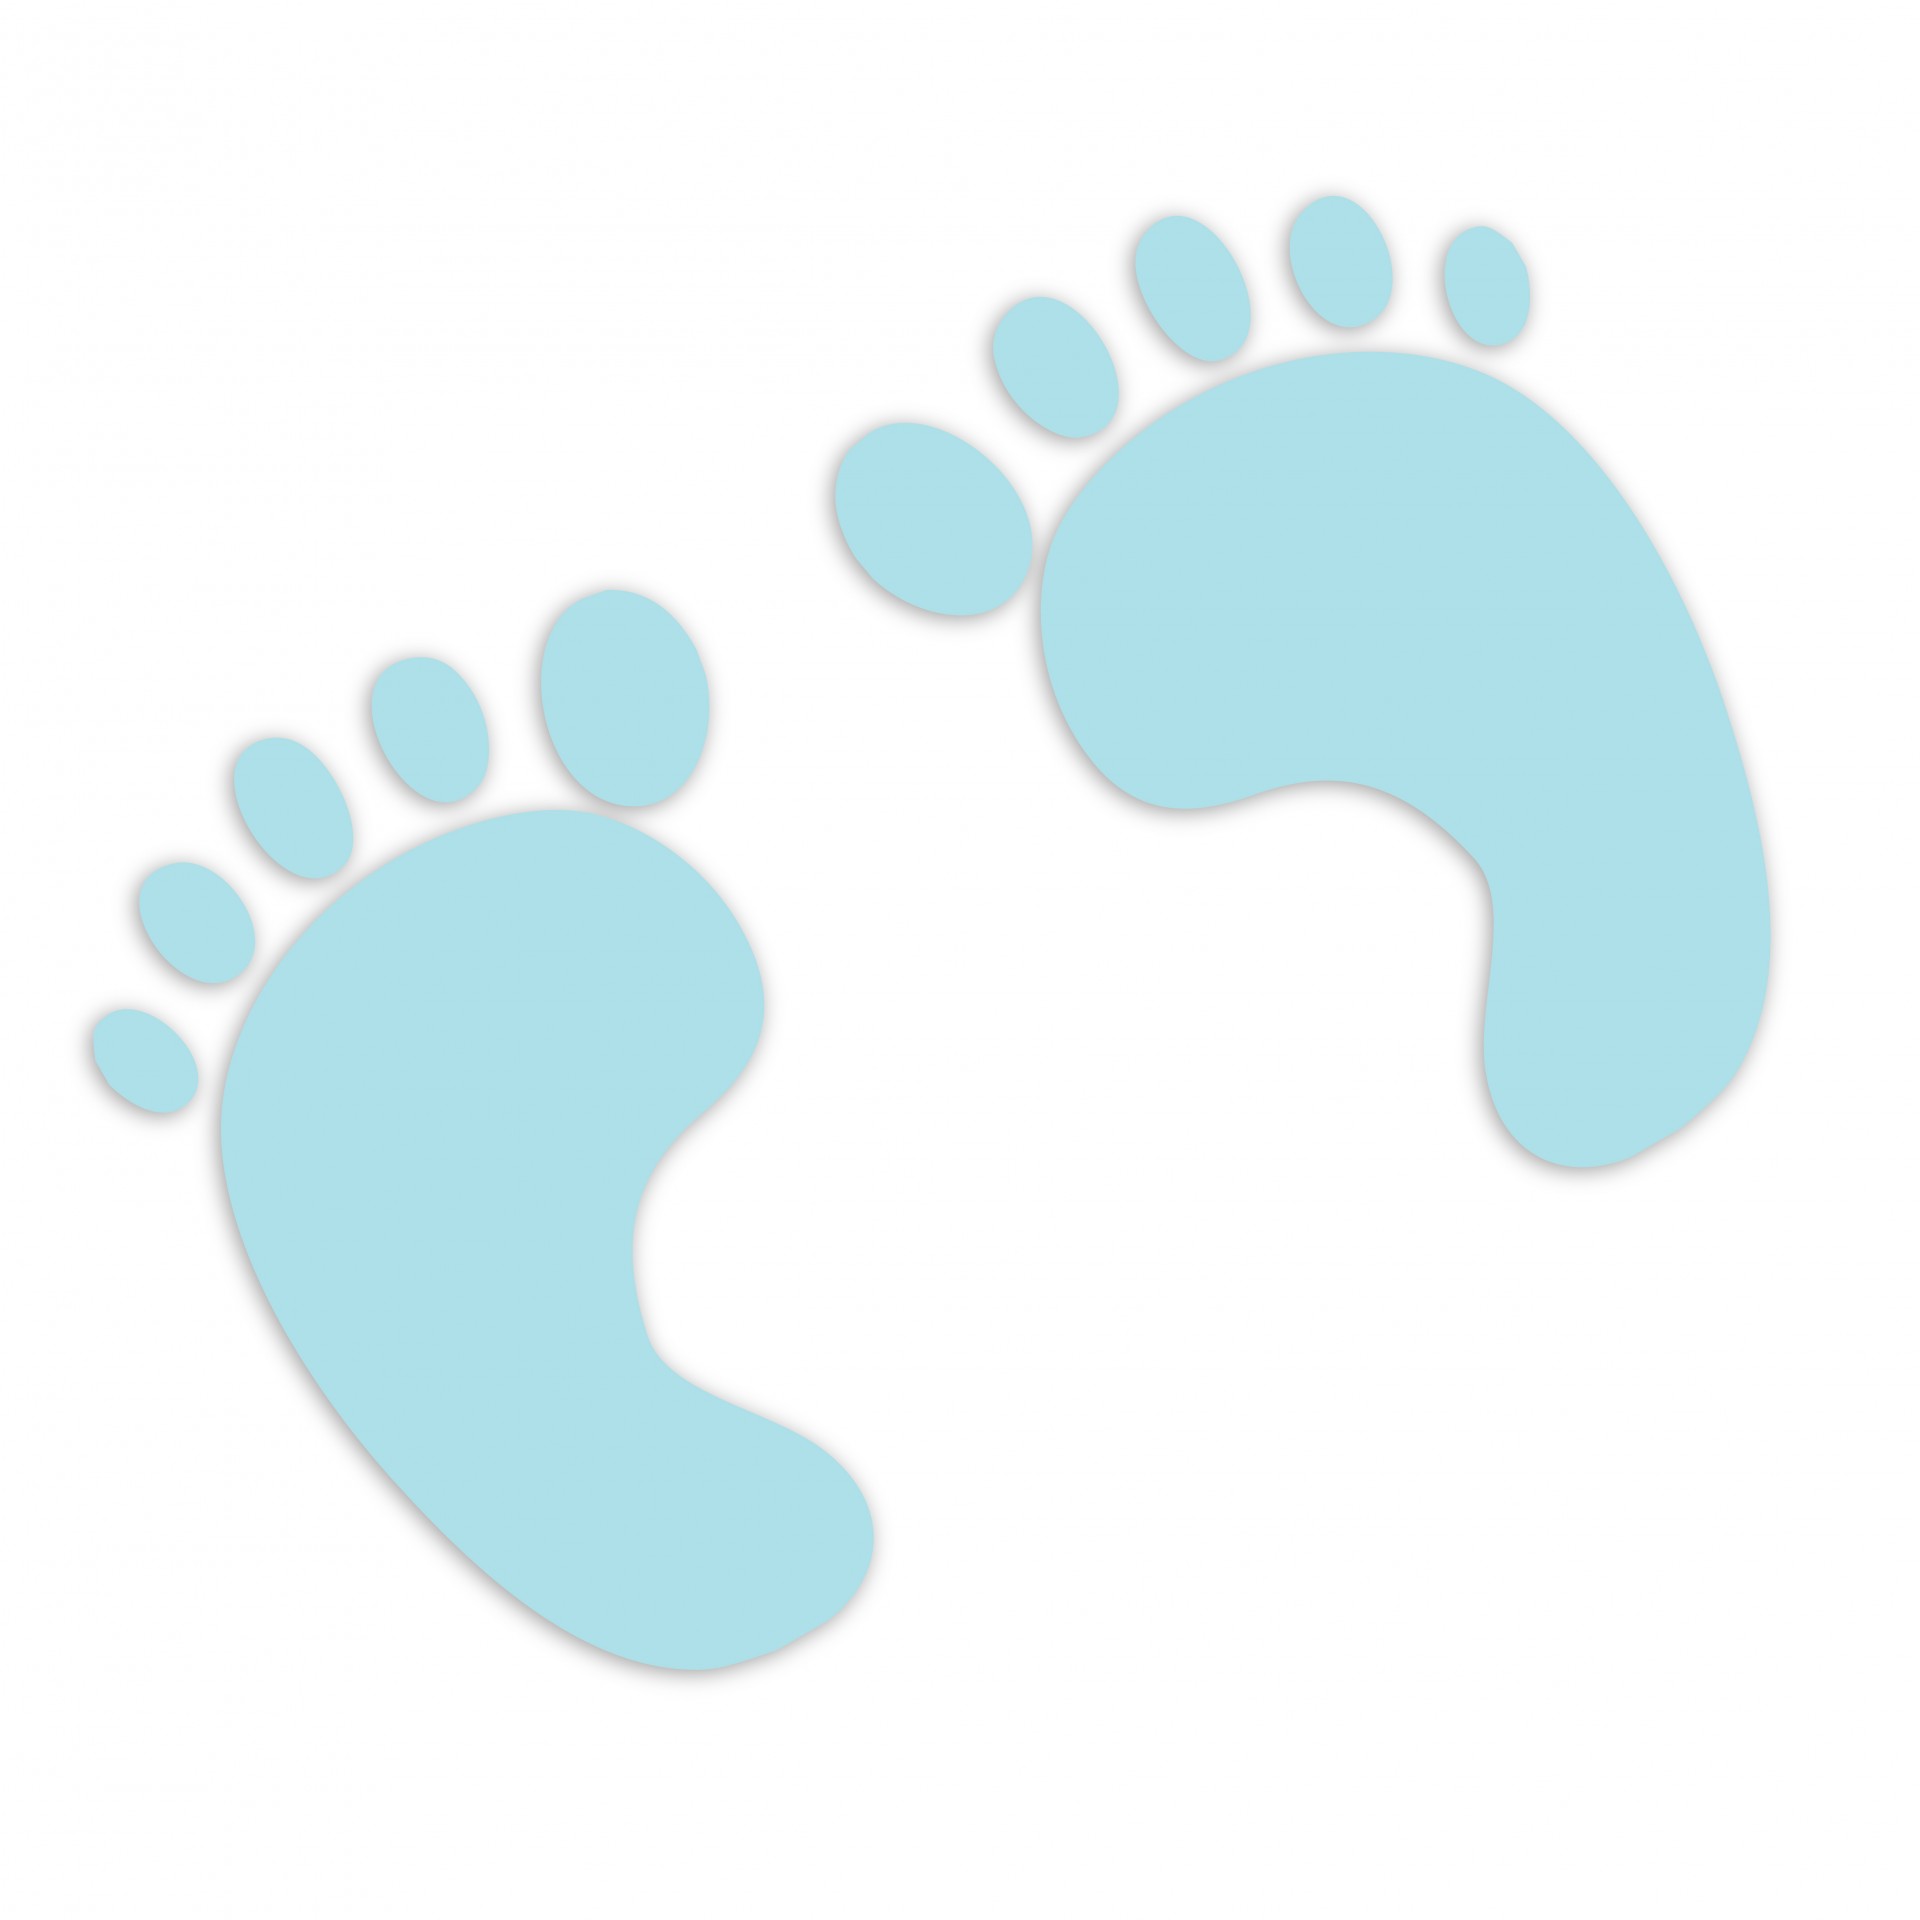 Baby feet baby footprints blue clipart free pictures